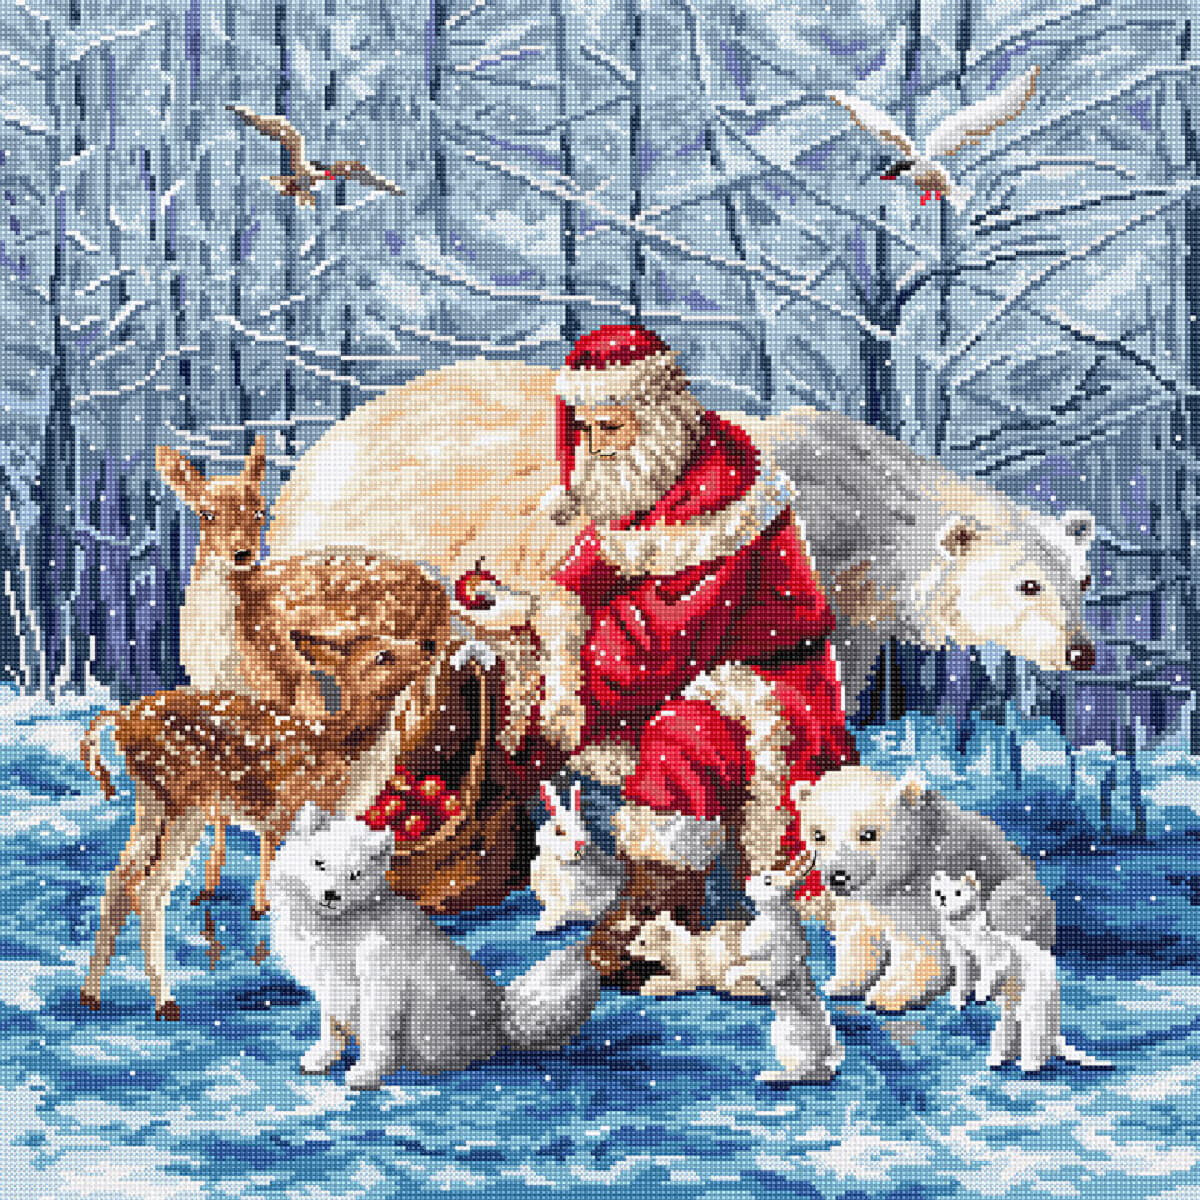 A winter landscape shows Santa Claus in a red suit...